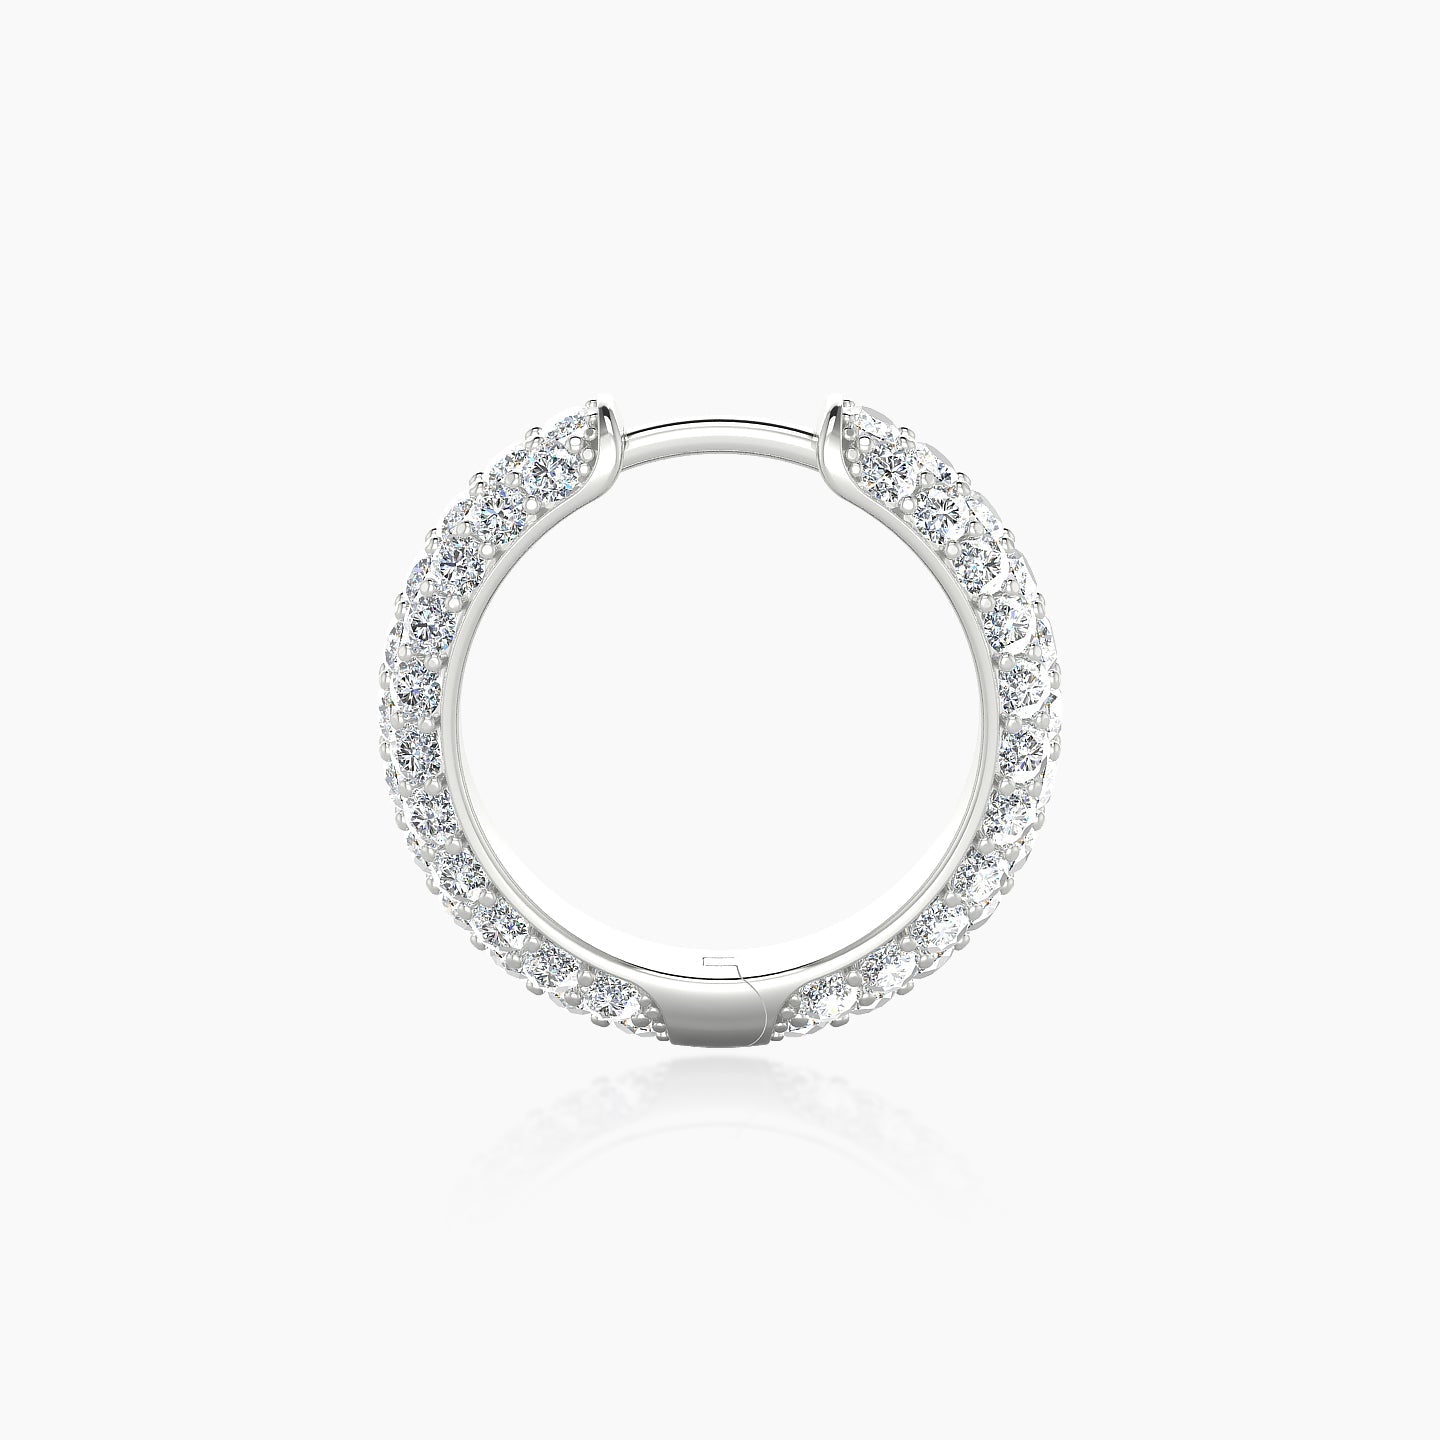 Theia | 18k White Gold 9.5 mm Pave Diamond Nose Ring Piercing